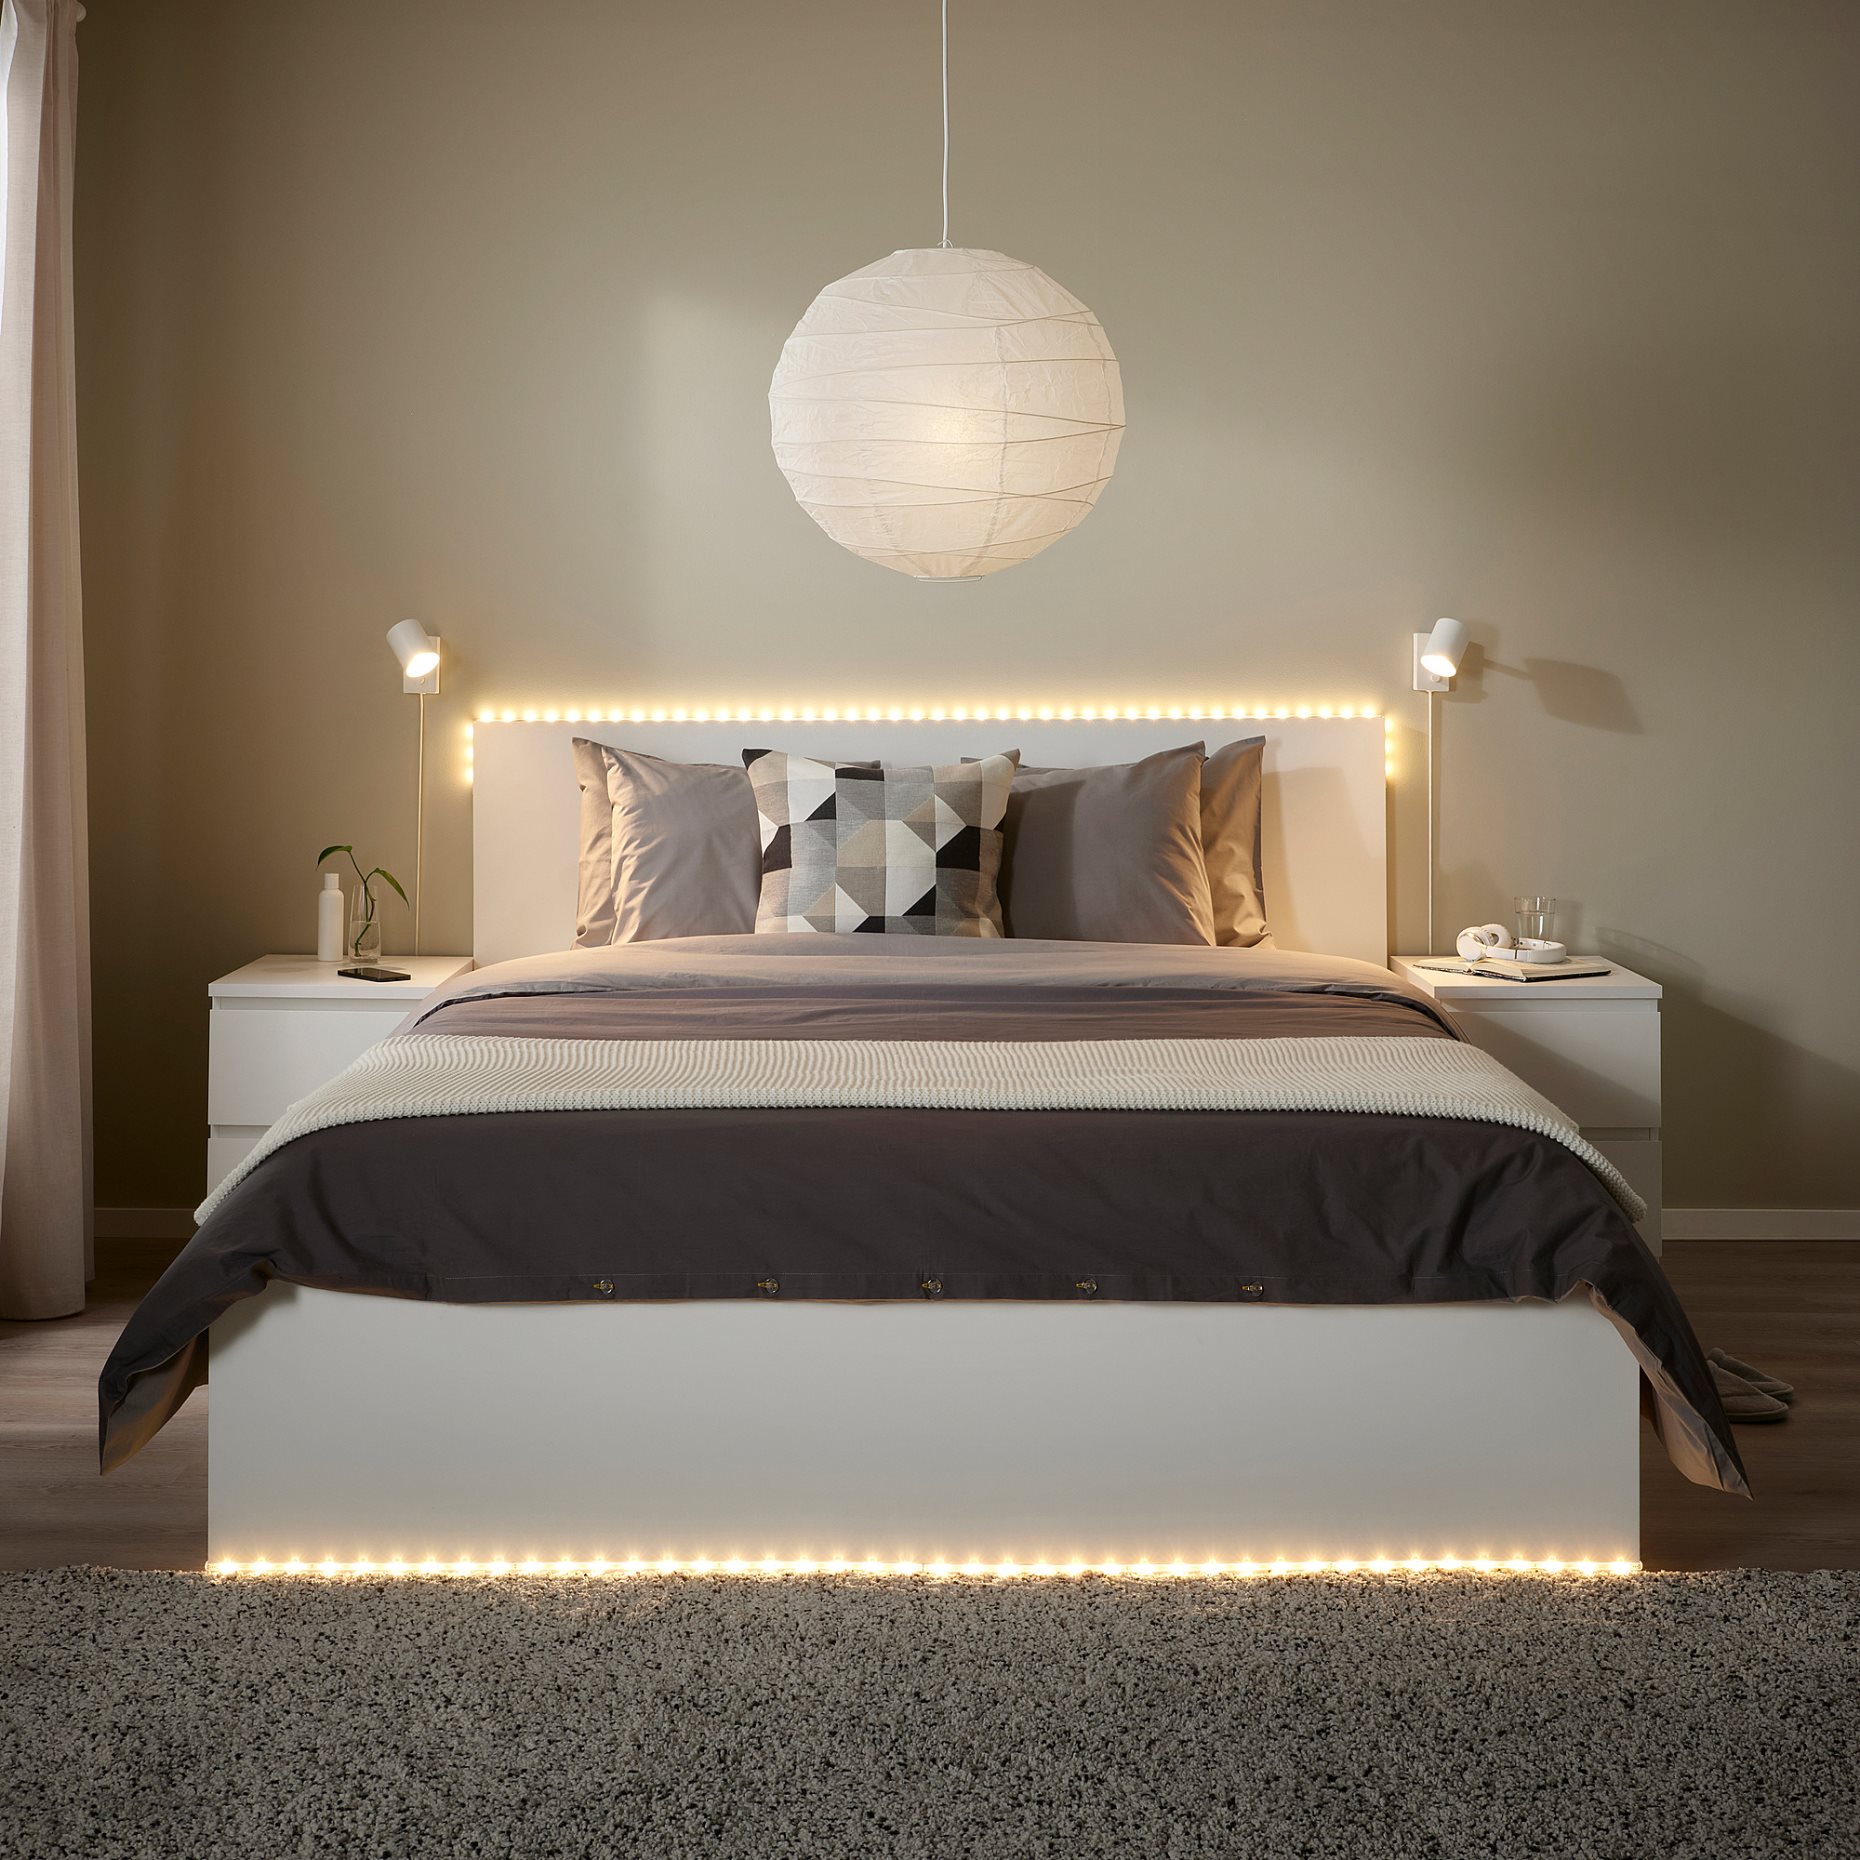 ORMANAS, lighting strip with built-in LED light source/smart, 4 m, 404.973.95